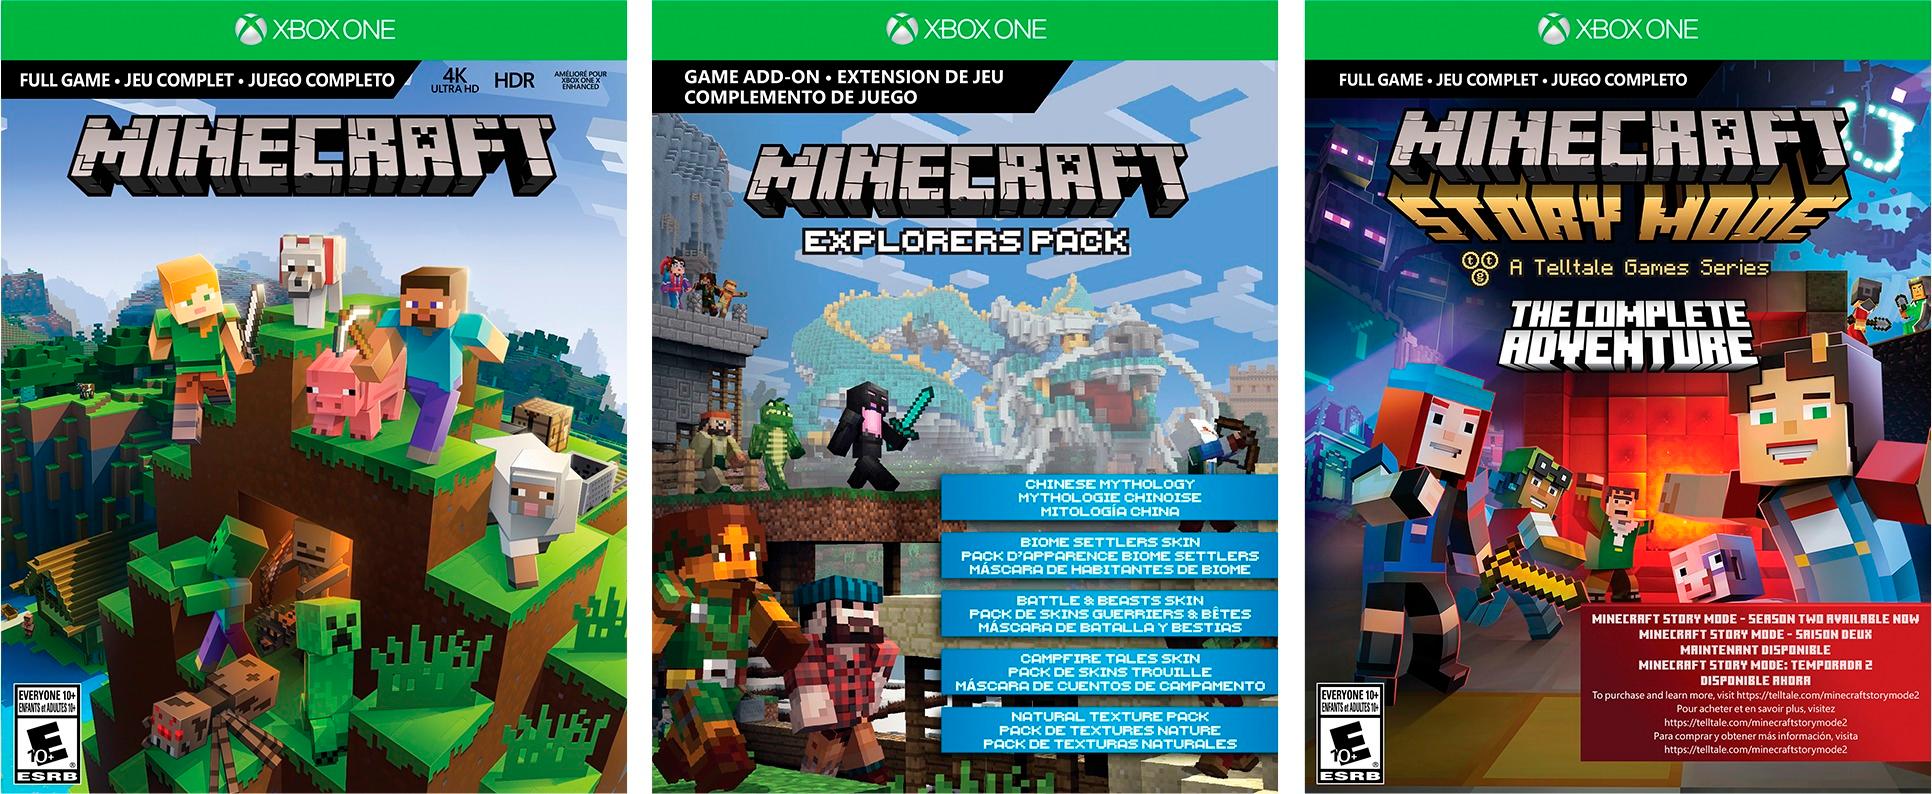 Minecraft: Story Mode The Complete Adventure Standard Edition Xbox One  MCSX1ST2 - Best Buy